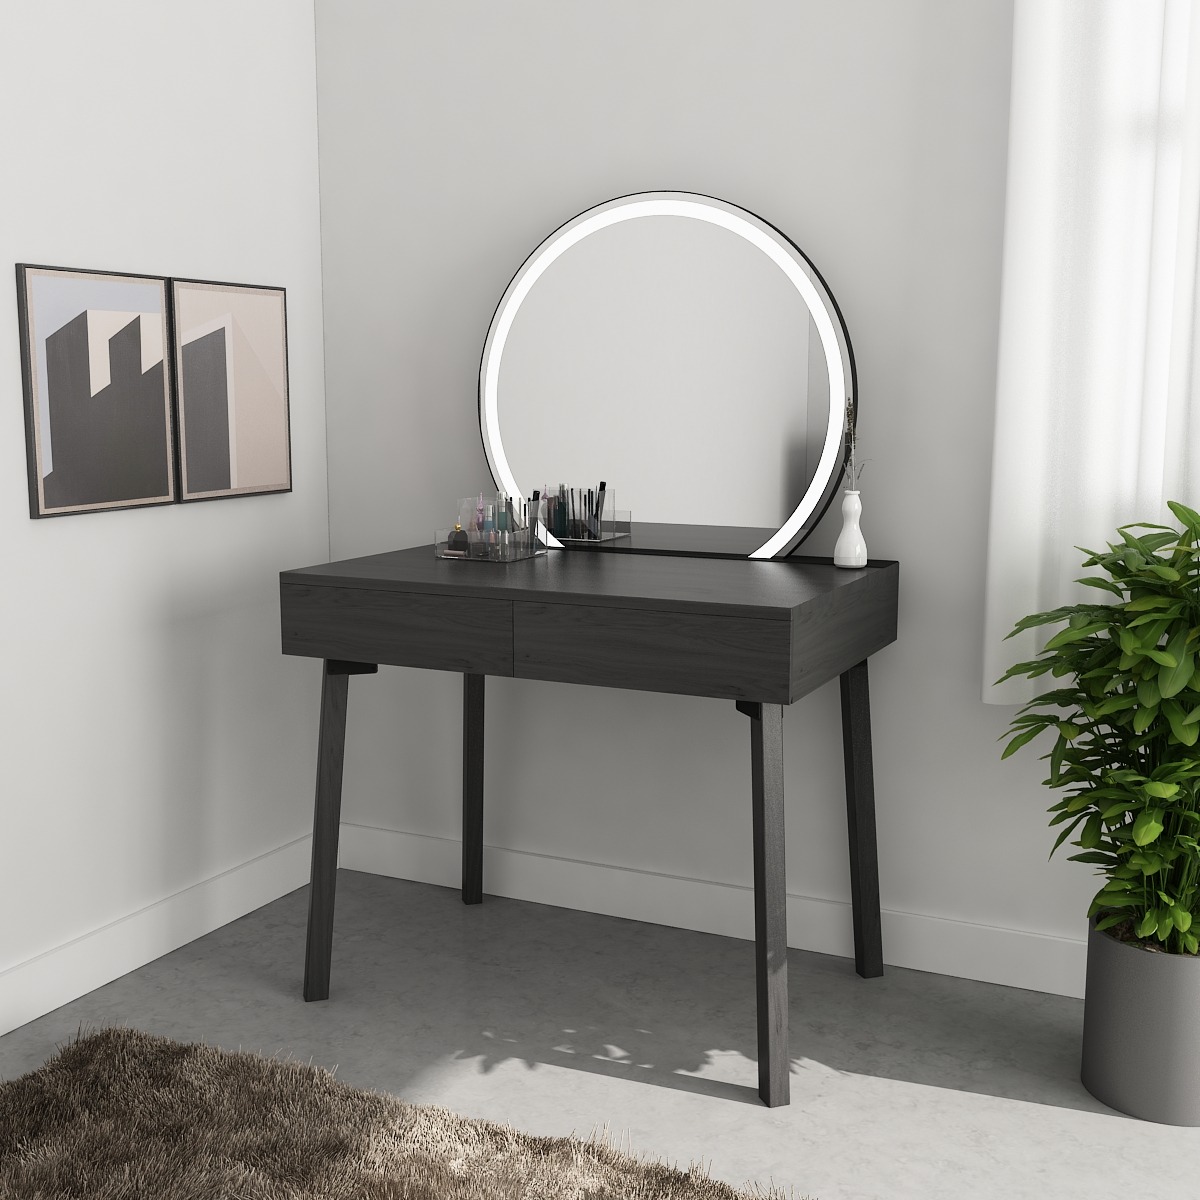 Dressing Tables: Shop Wooden Dressers & Mirrors Online in India